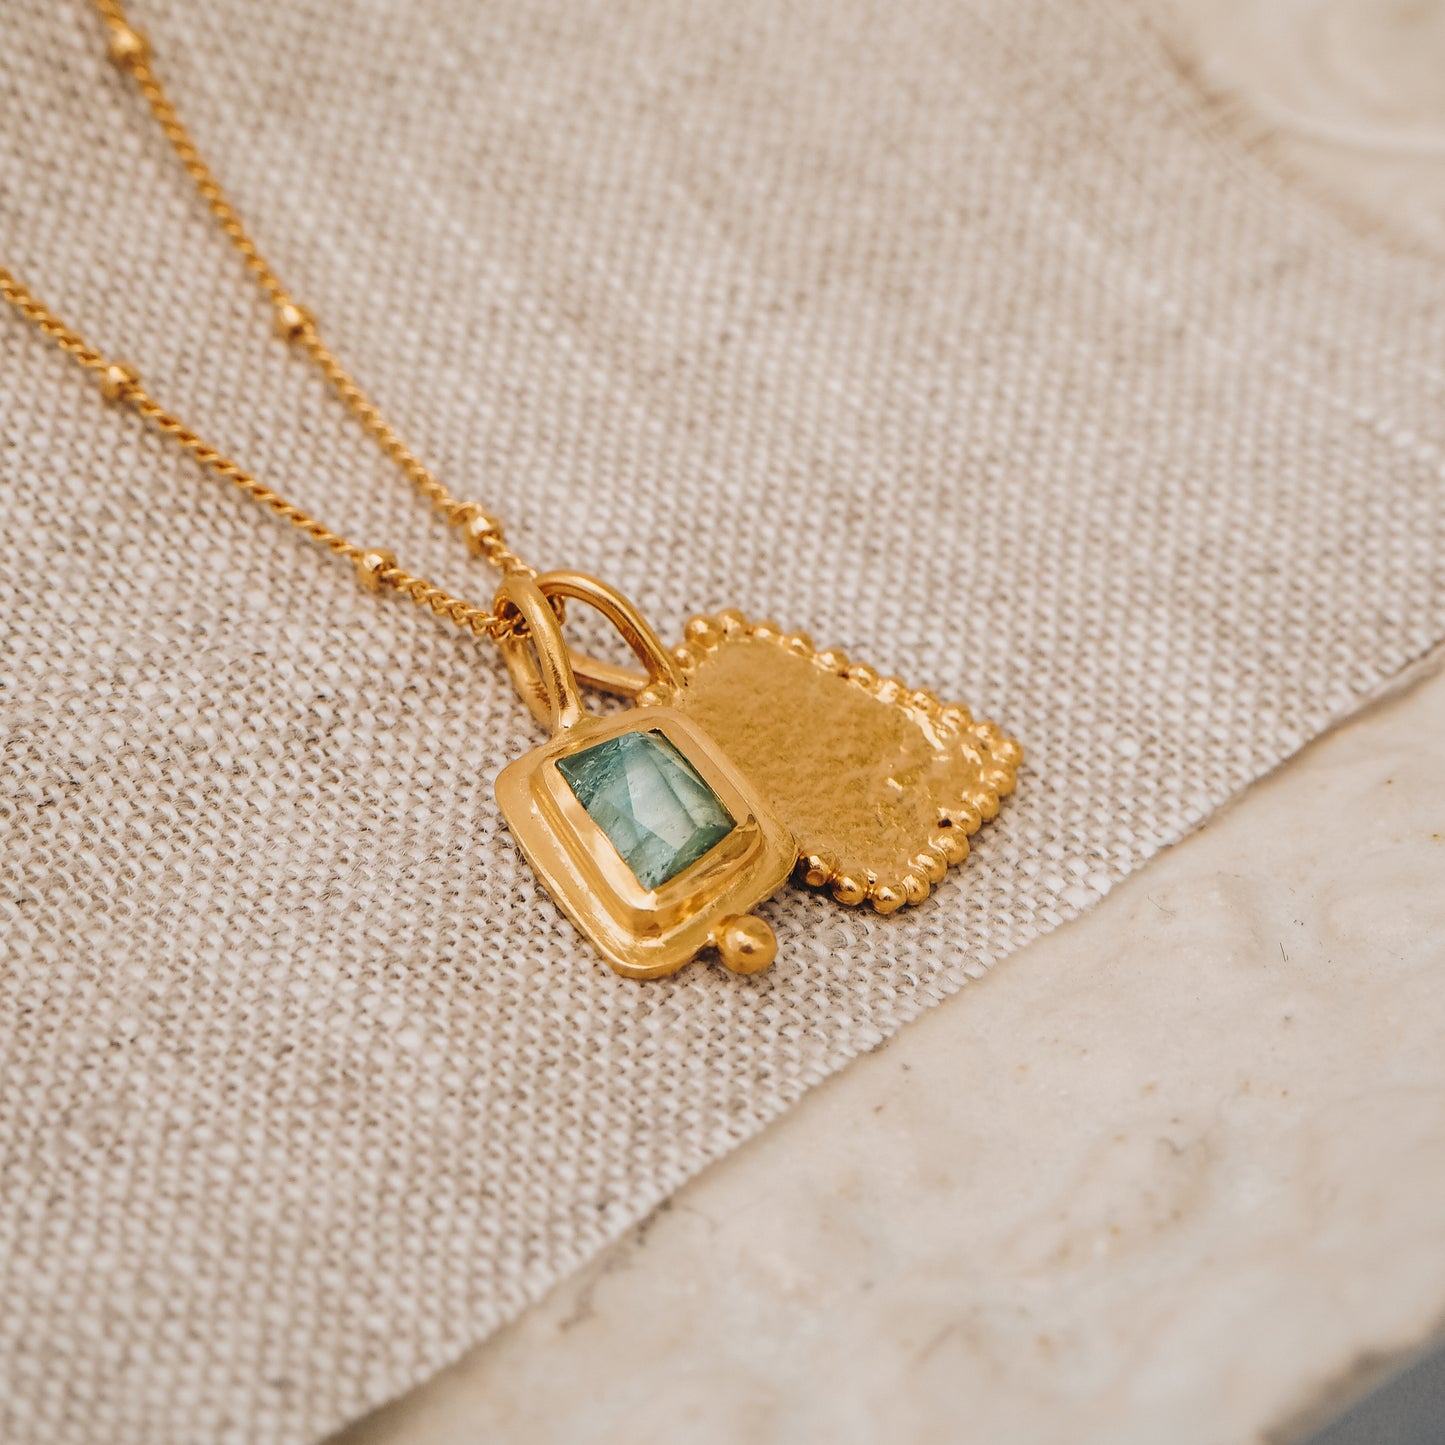 Elegant square gold pendant featuring a stunning blue rose cut tourmaline gemstone and delicate granulation, suspended from a fine satellite chain.